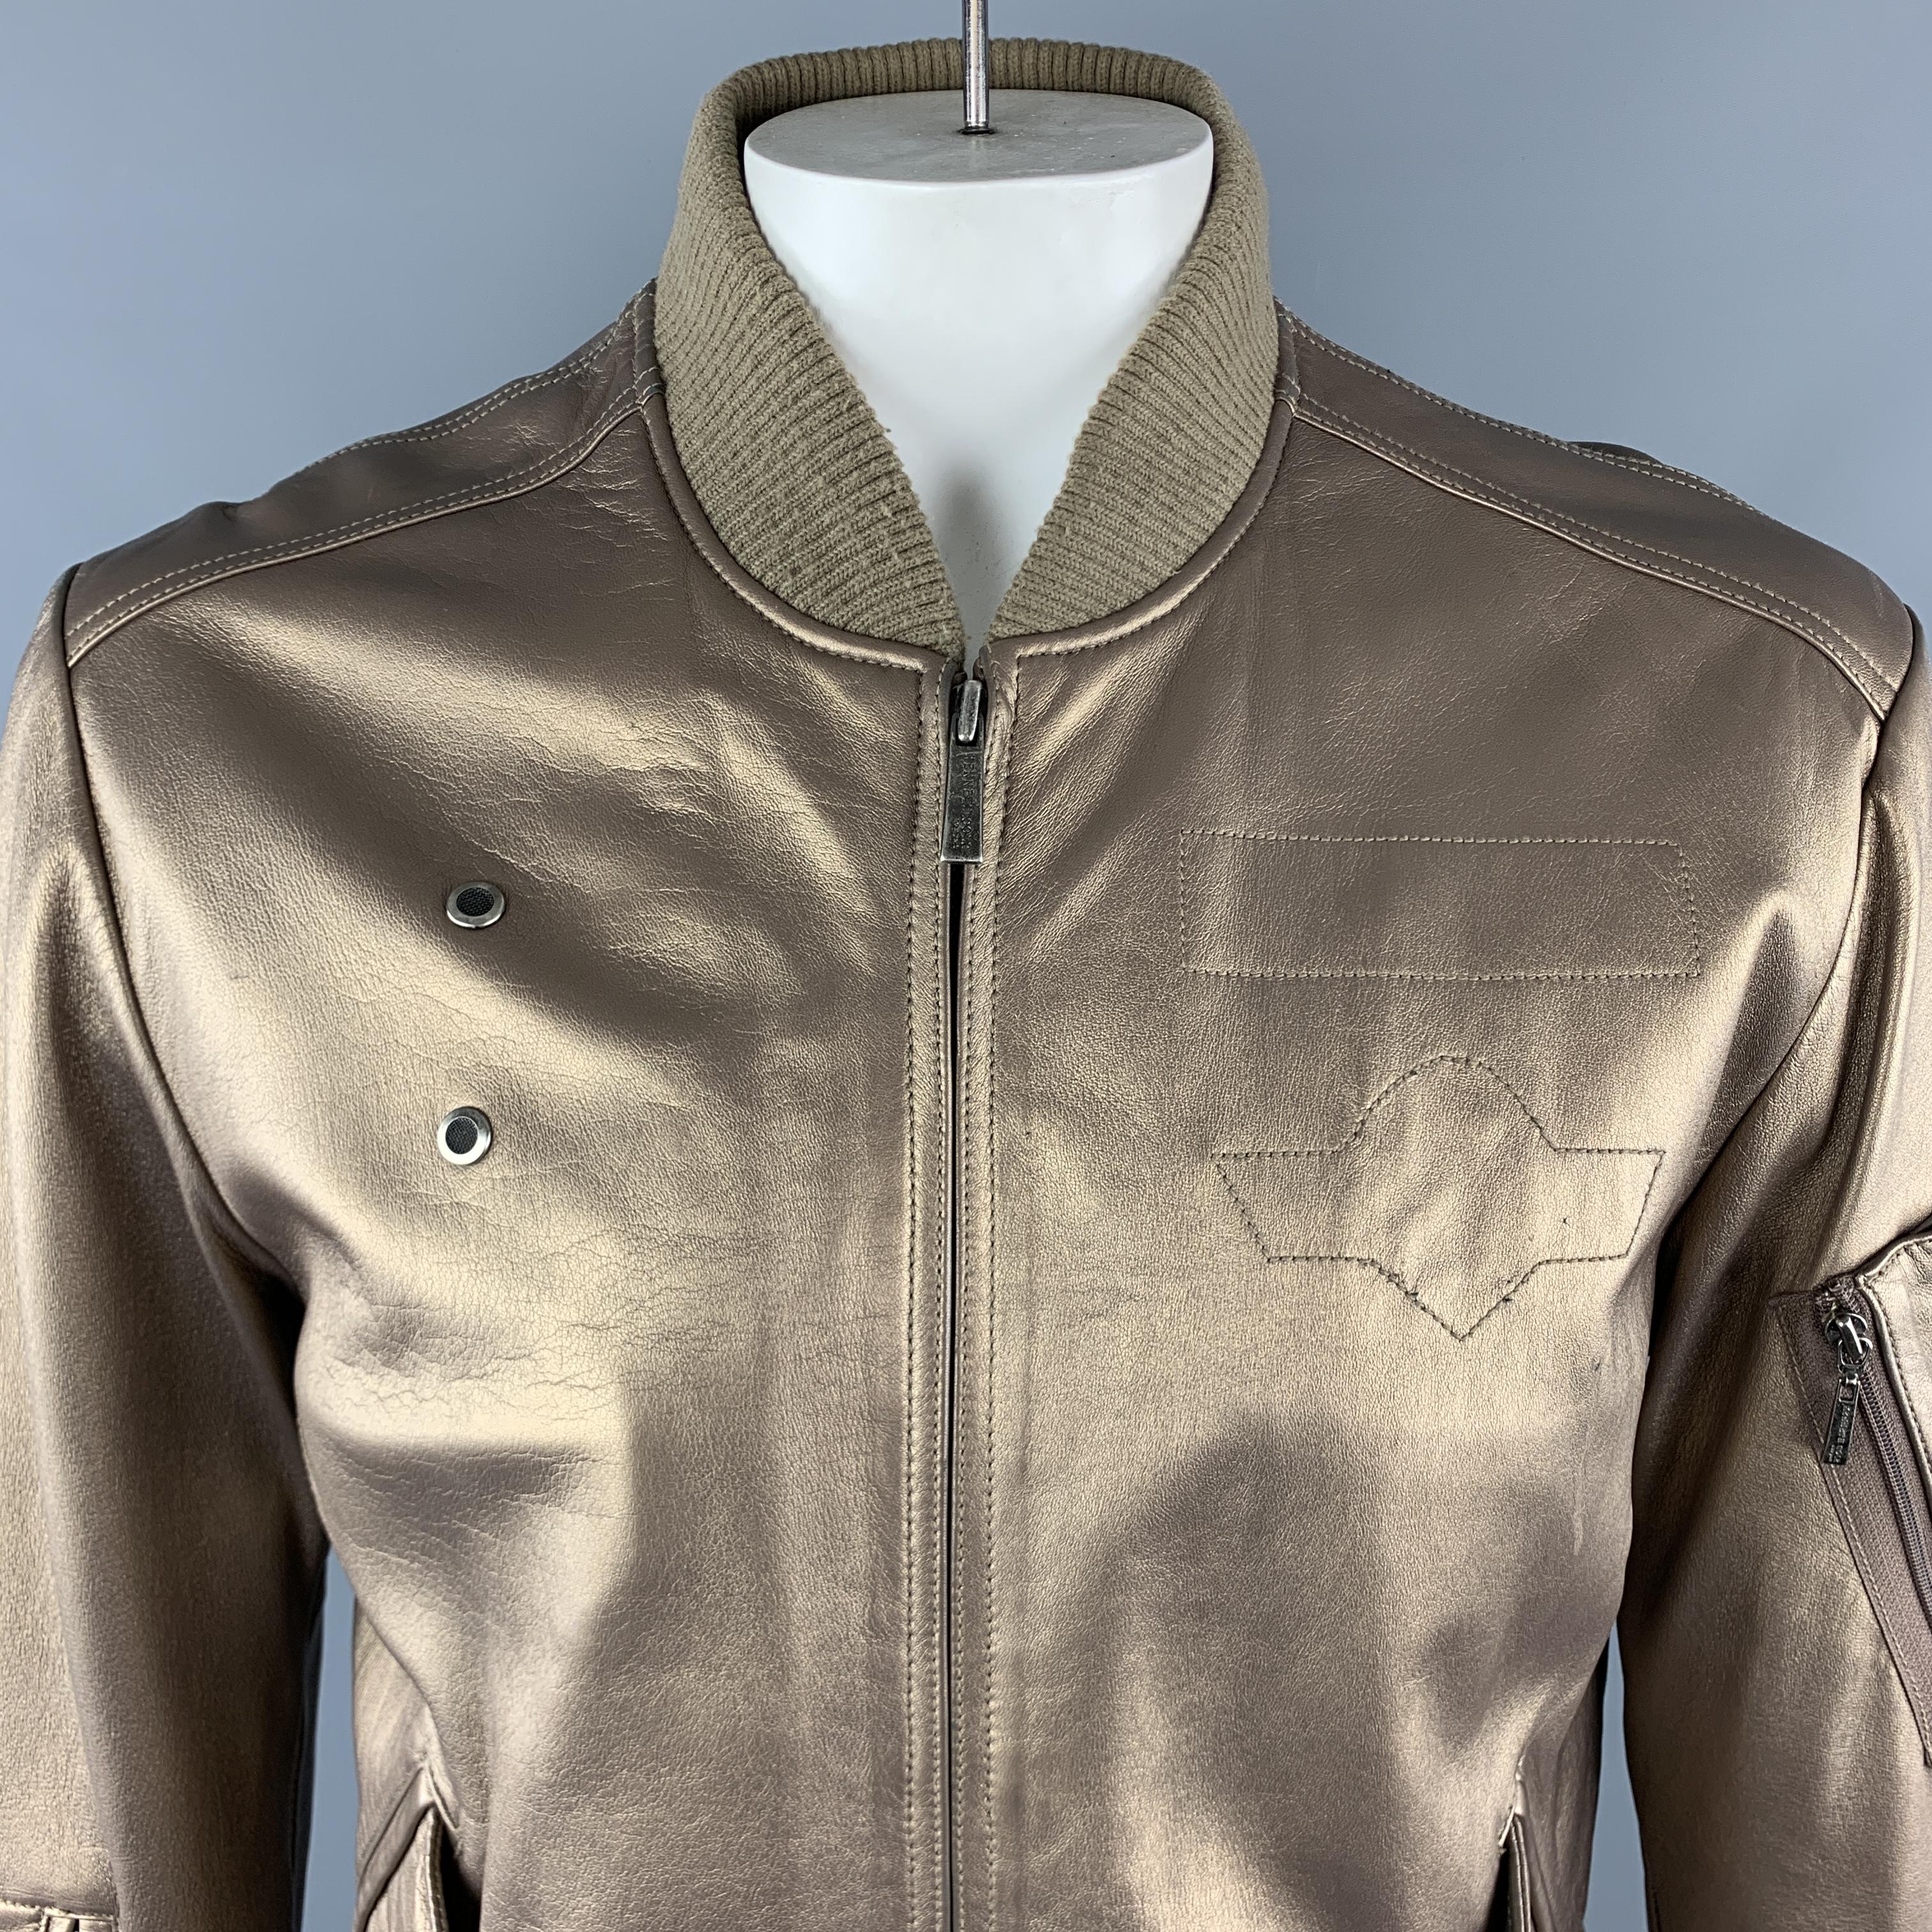 KENNETH COLE VINTAGE Bomber Style Jacket comes in a gold tone in a solid metallic leather material, with a zipped front, single breasted, zip and flap pockets, internal pockets, and ribbed cuffs and hem. Light wear throughout.

Very Good Pre-Owned